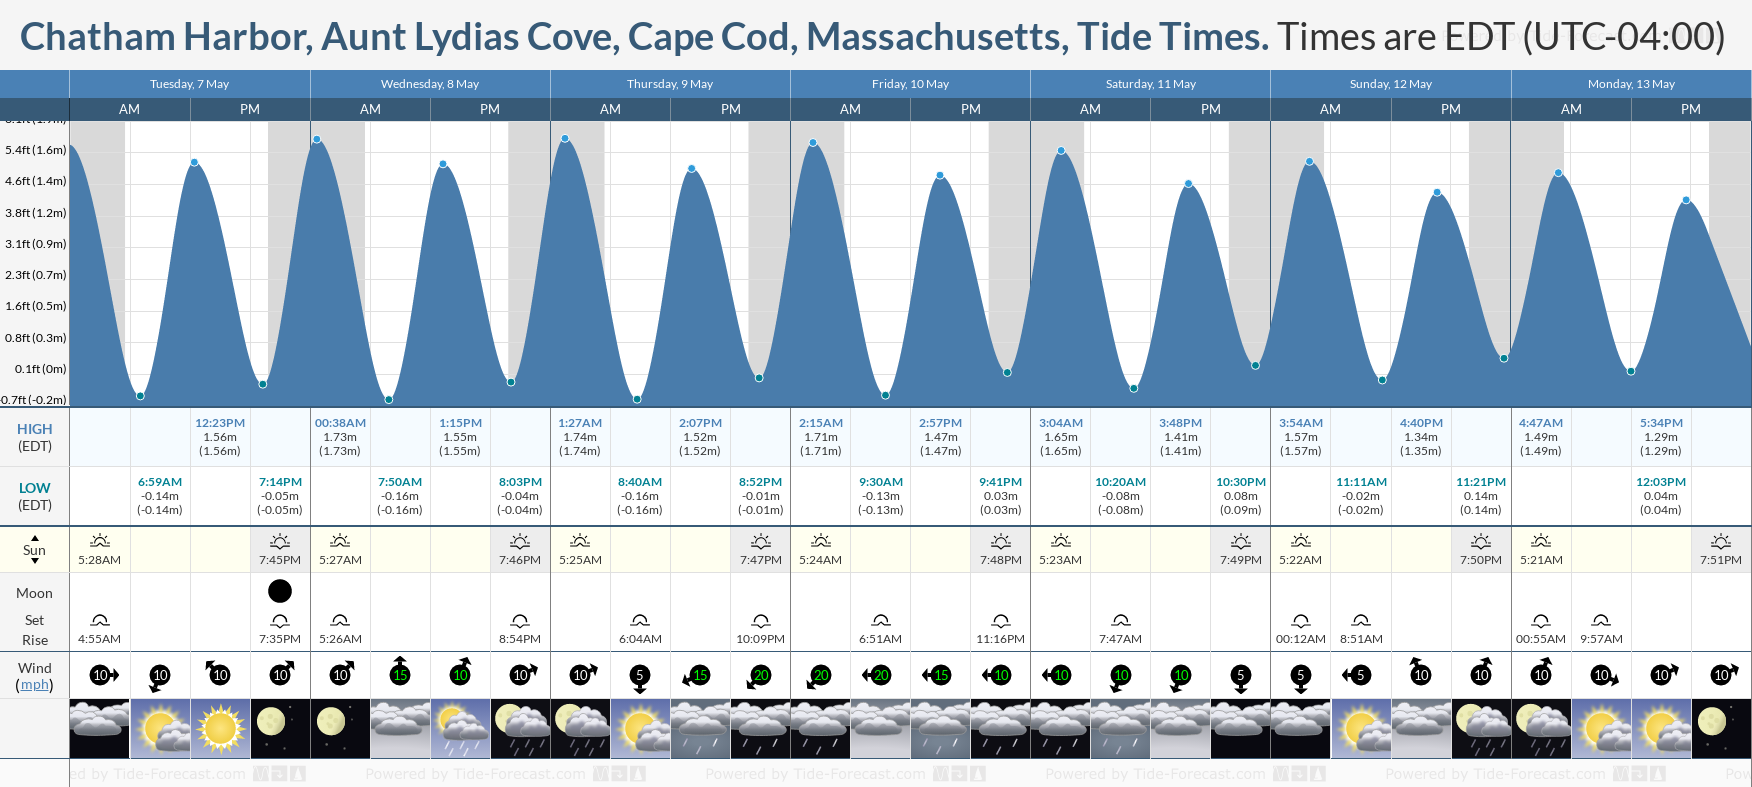 Chatham Harbor, Aunt Lydias Cove, Cape Cod, Massachusetts Tide Chart including high and low tide times for the next 7 days